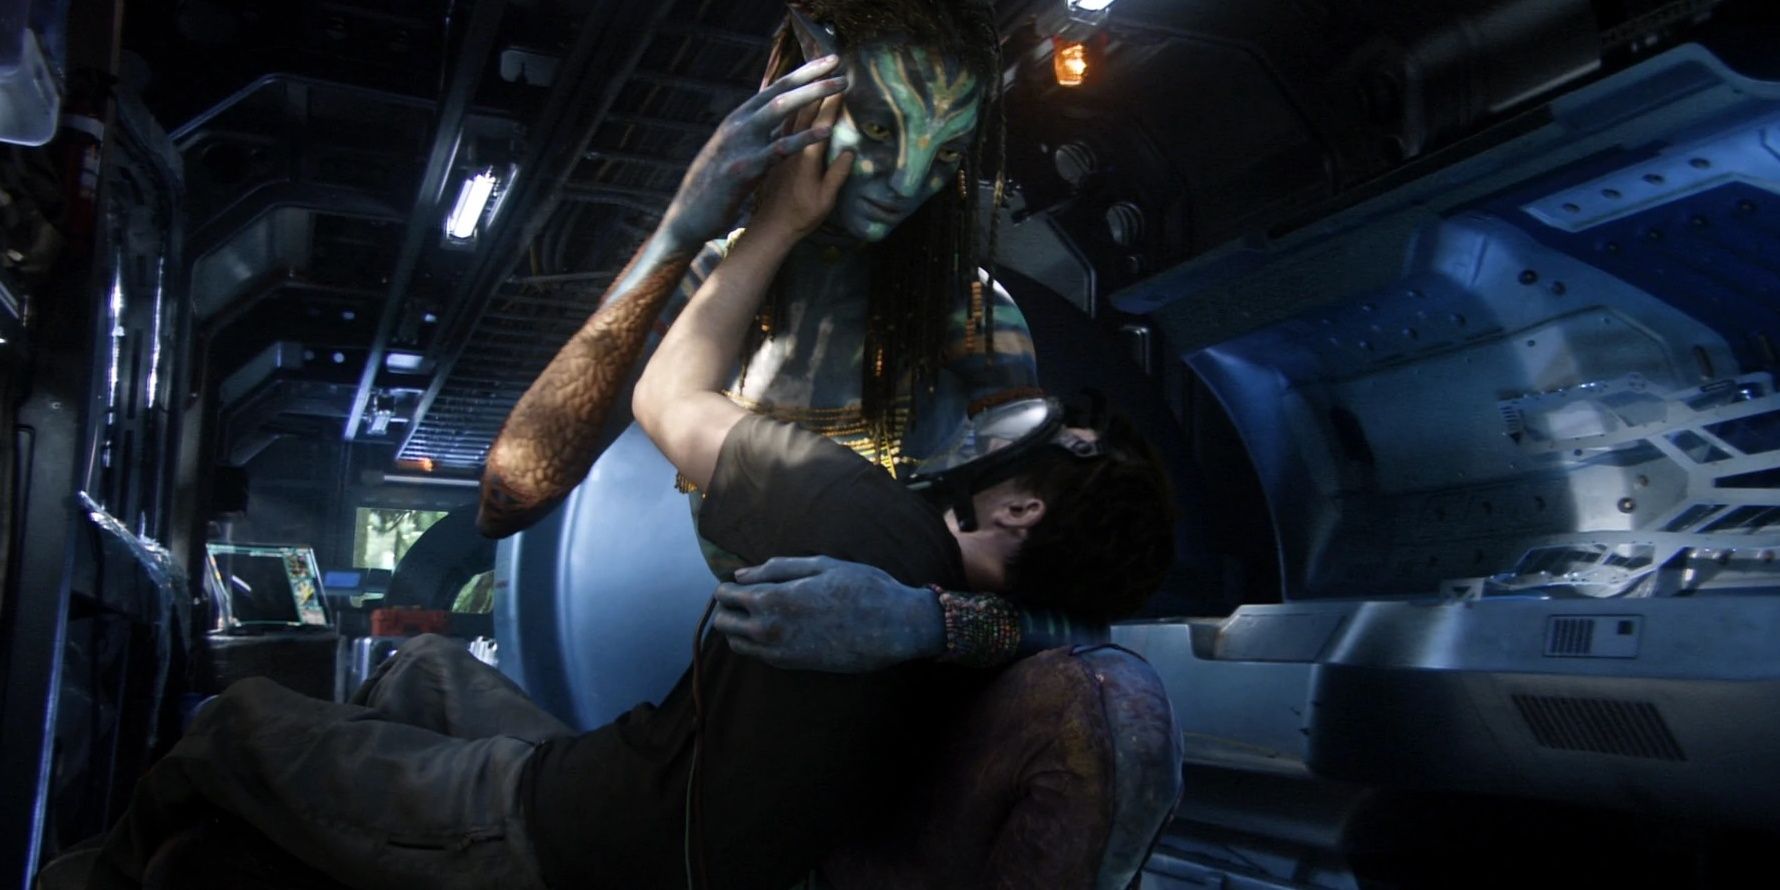 Neytiri-meets-Jake-Sully-as-a-human-for-the-first-time-in-Avatar-2009-Cropped-1